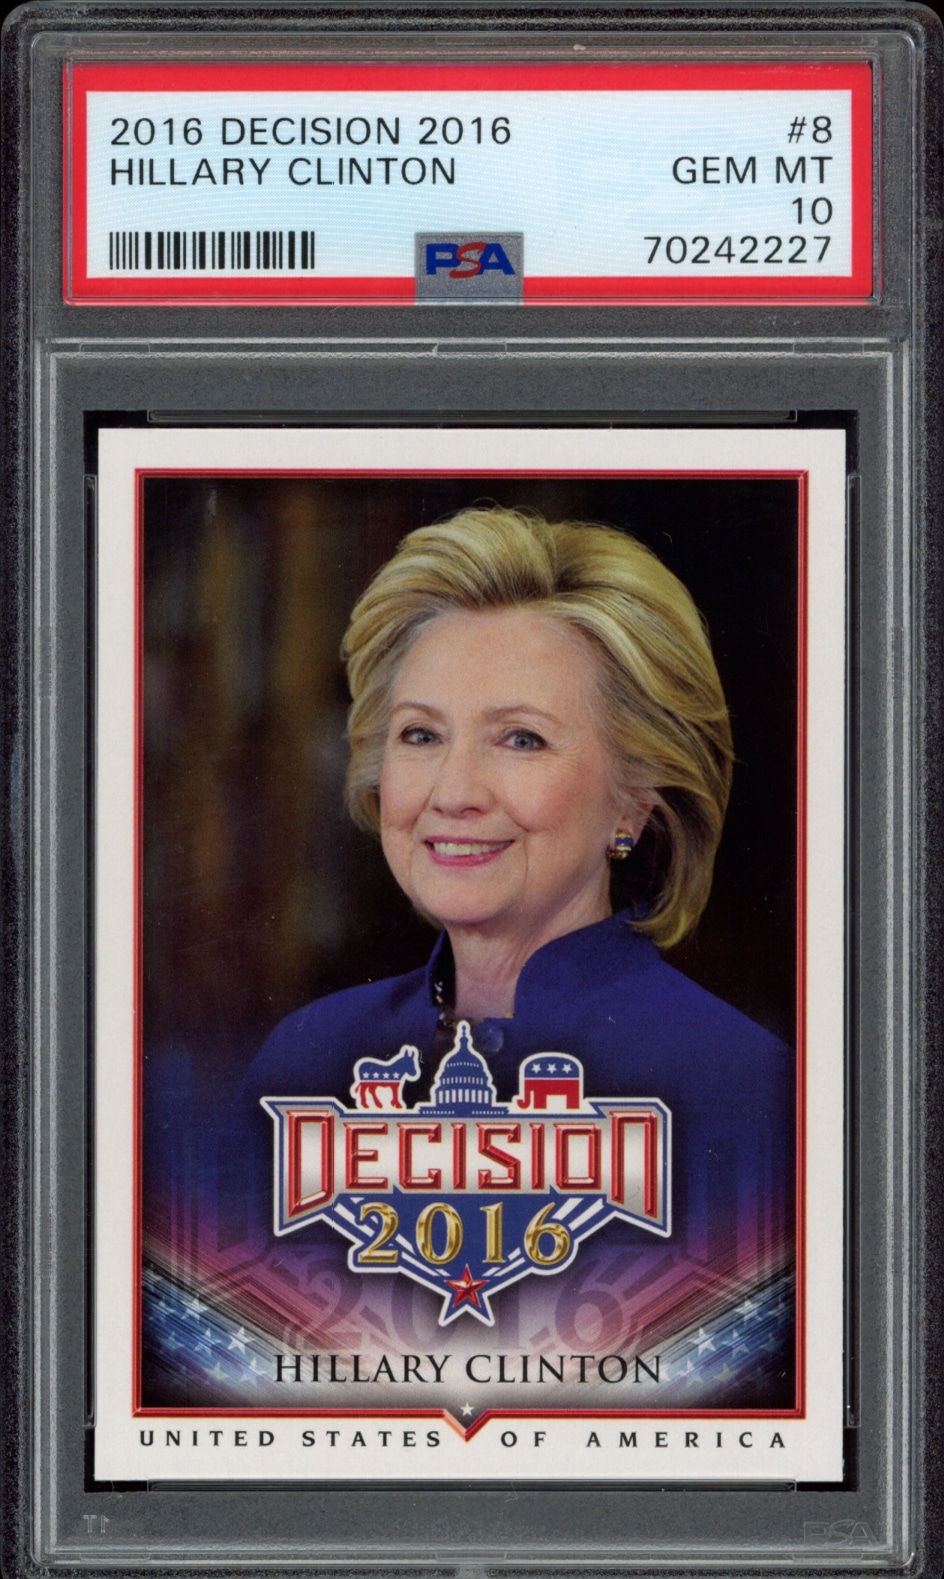 PSA 10 graded 2016 Leaf Decision trading card featuring Hillary Clinton.